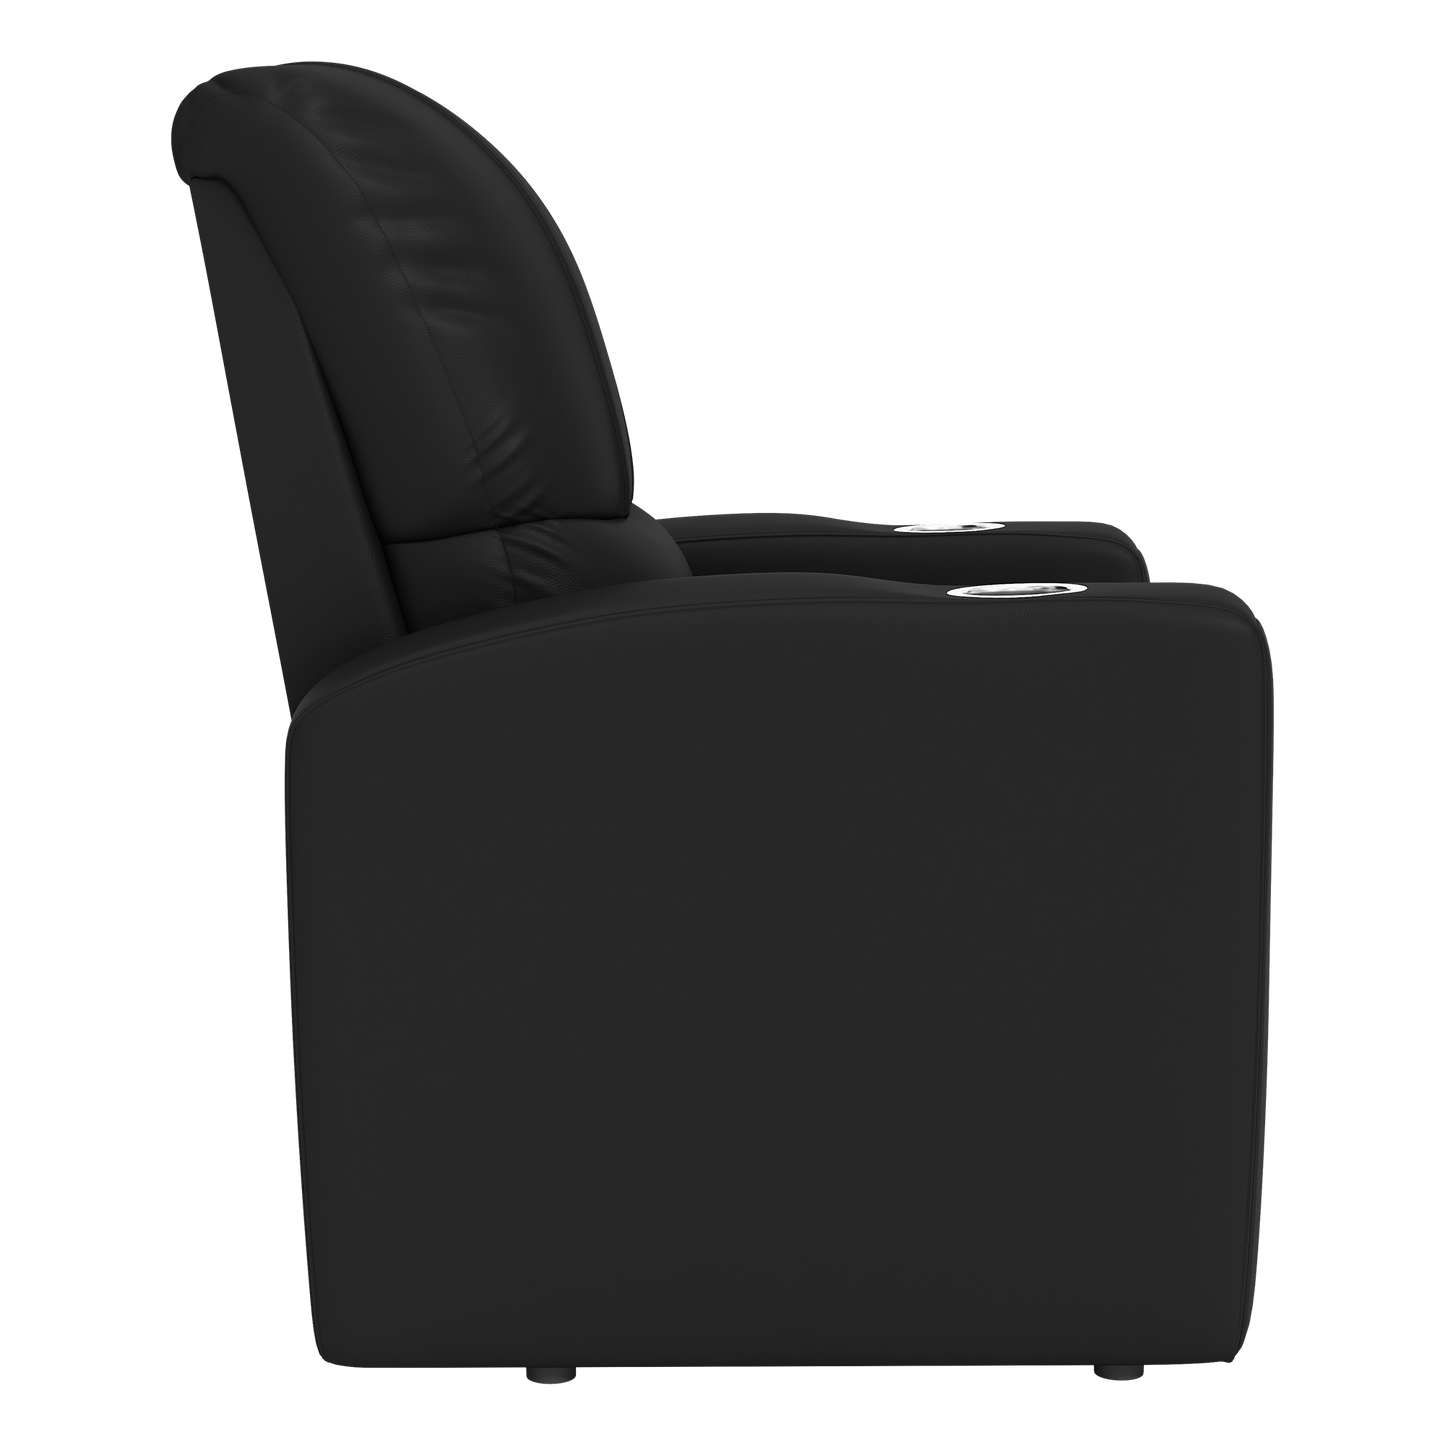 Stealth Recliner with Texas Longhorns Alternate